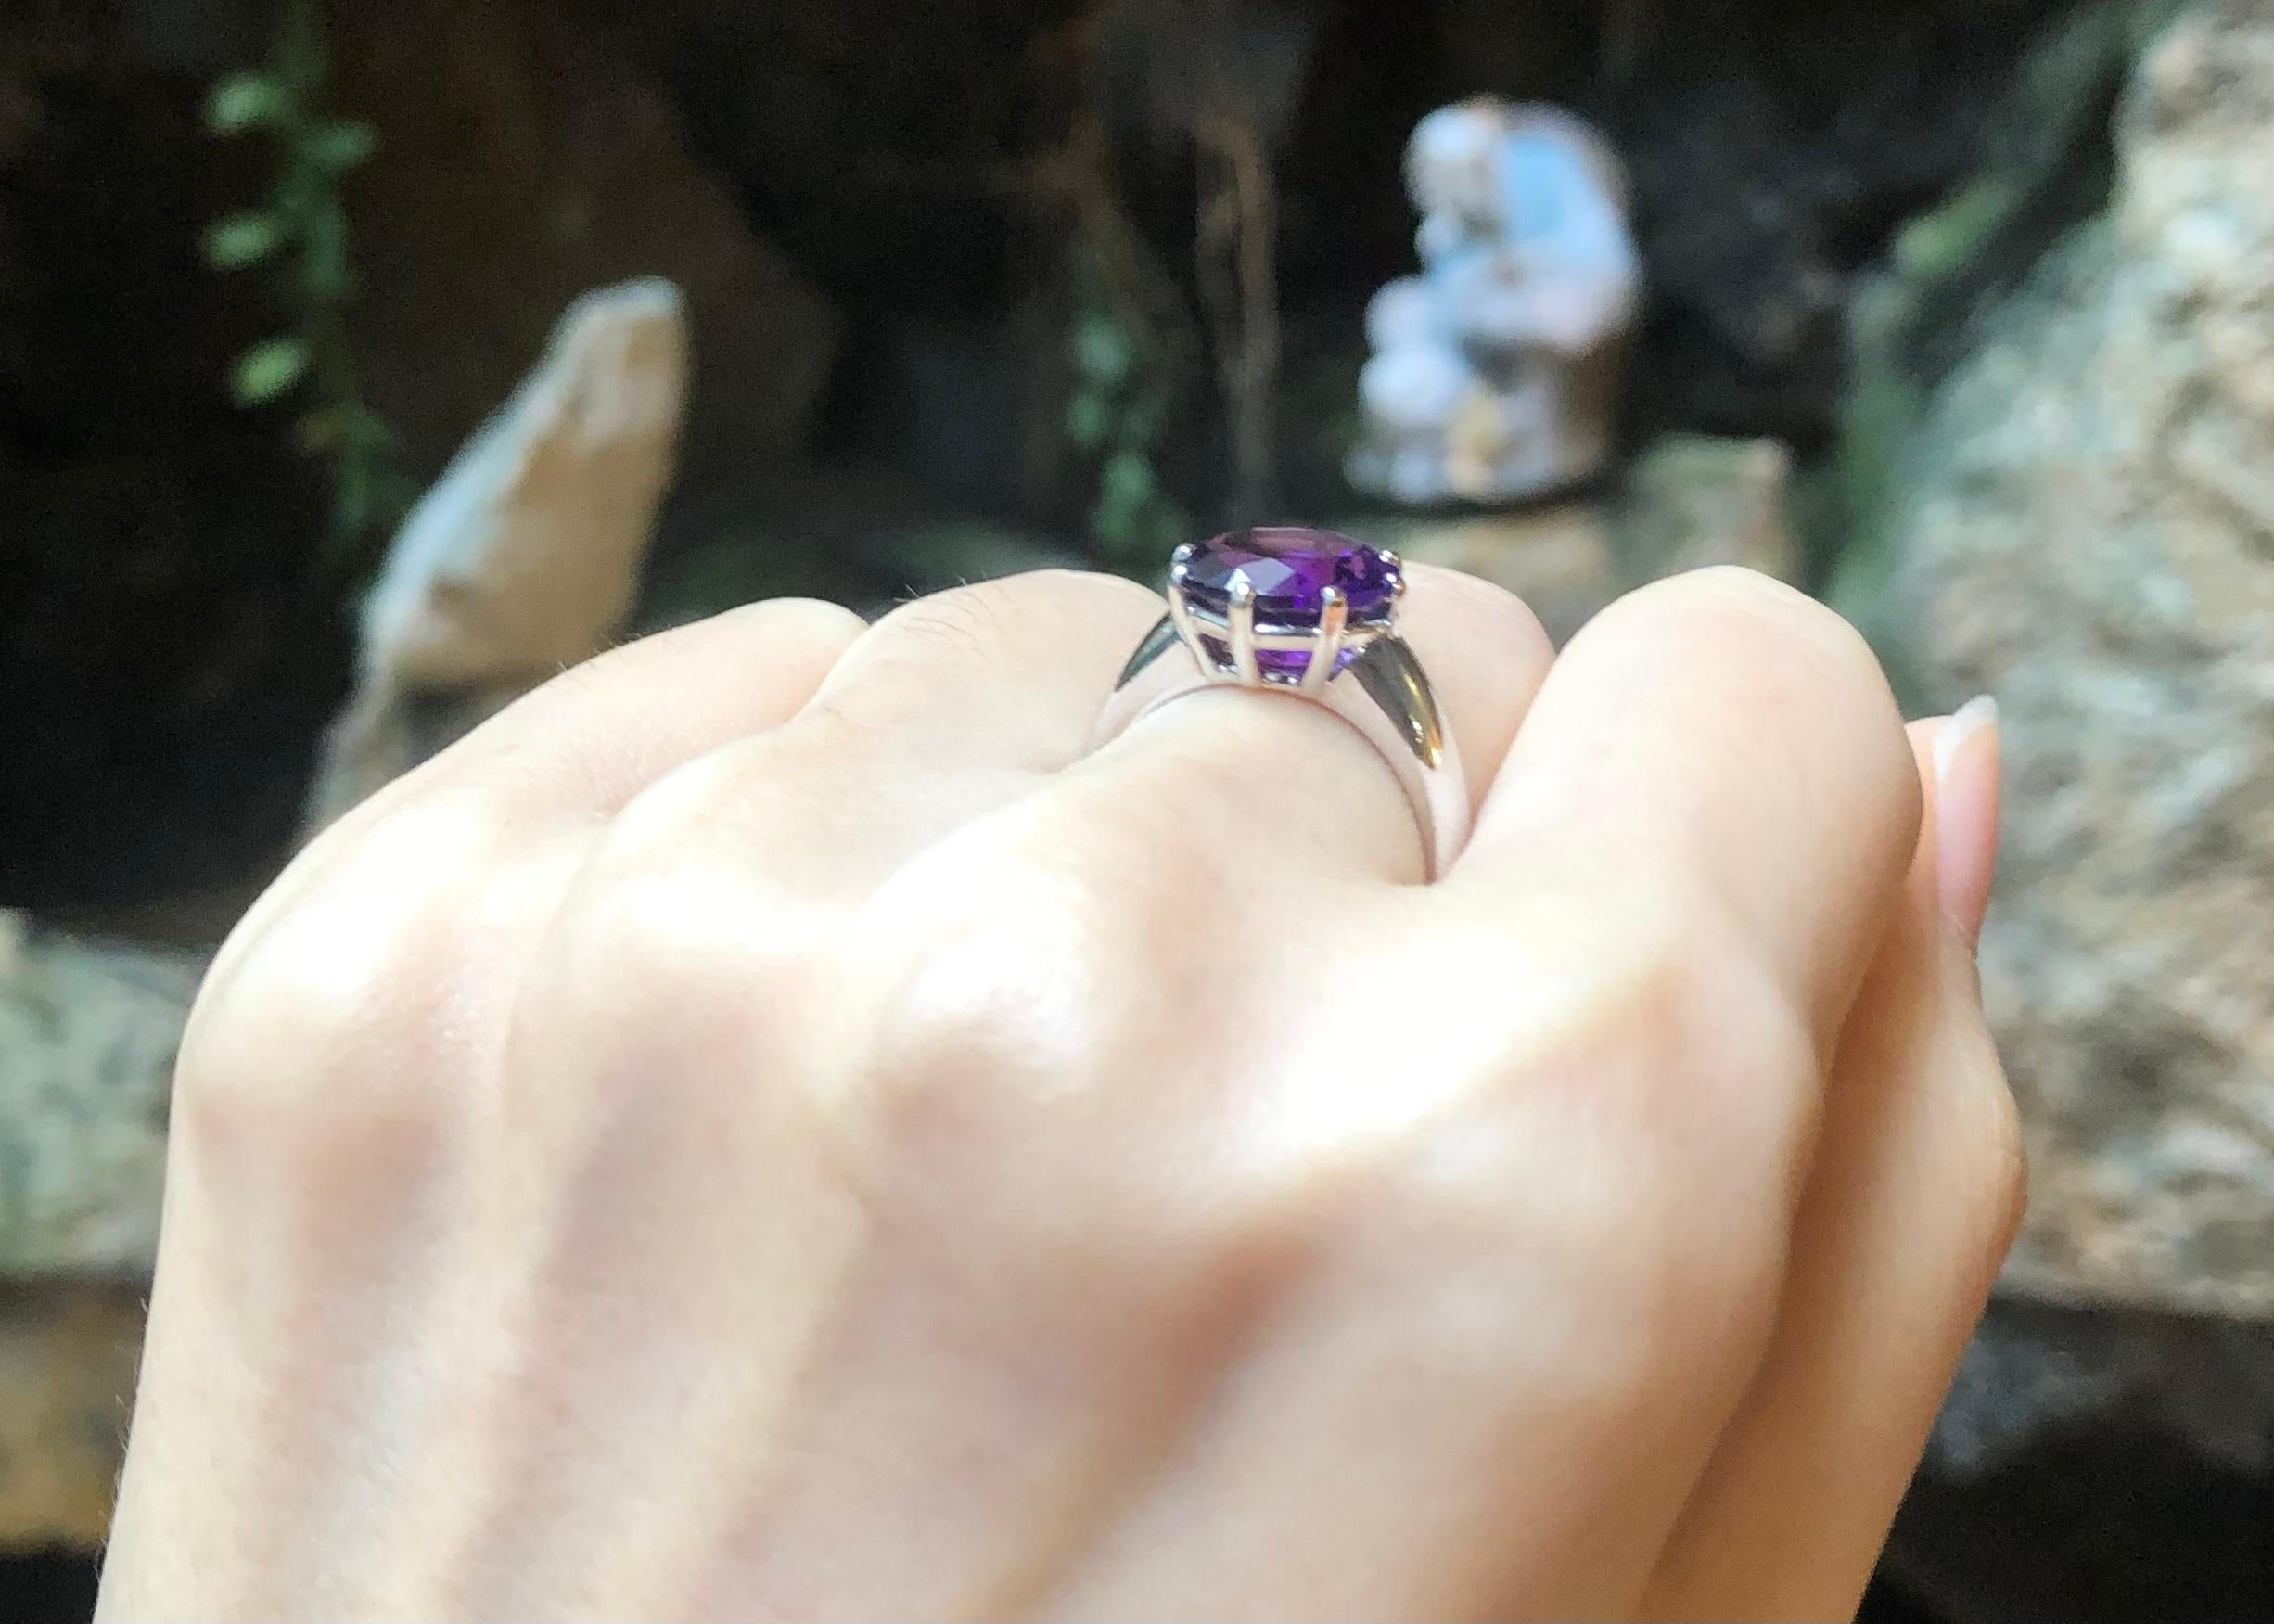 Amethyst 3.69 carats Ring set in 18K White Gold Settings

Width:  1.0 cm 
Length: 1.0 cm
Ring Size: 51
Total Weight: 7.4 grams

